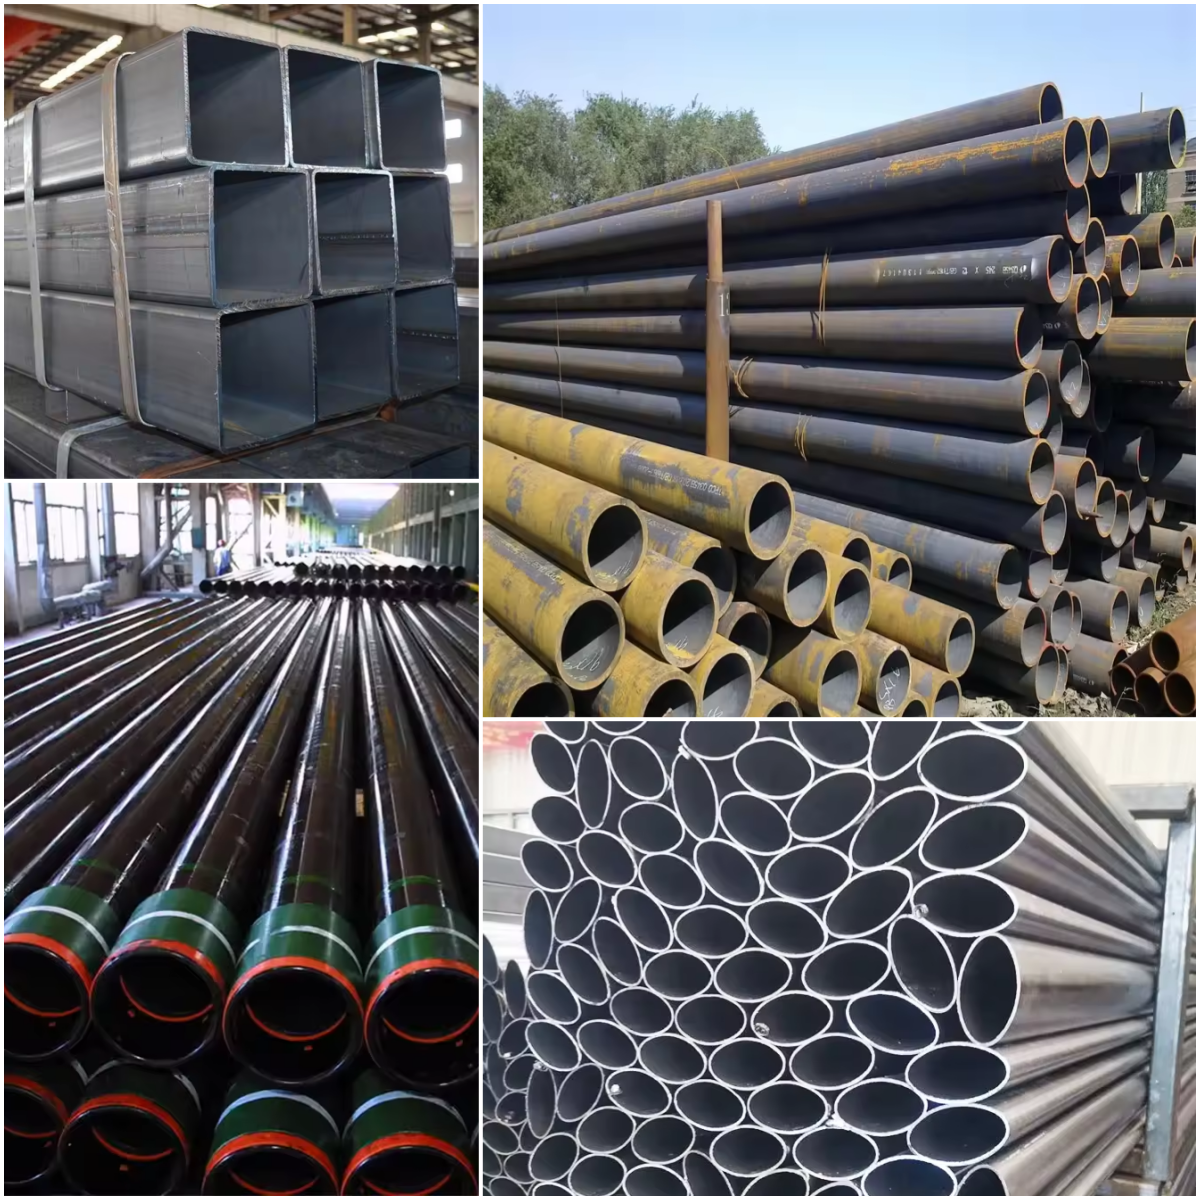 caobon steel pipes